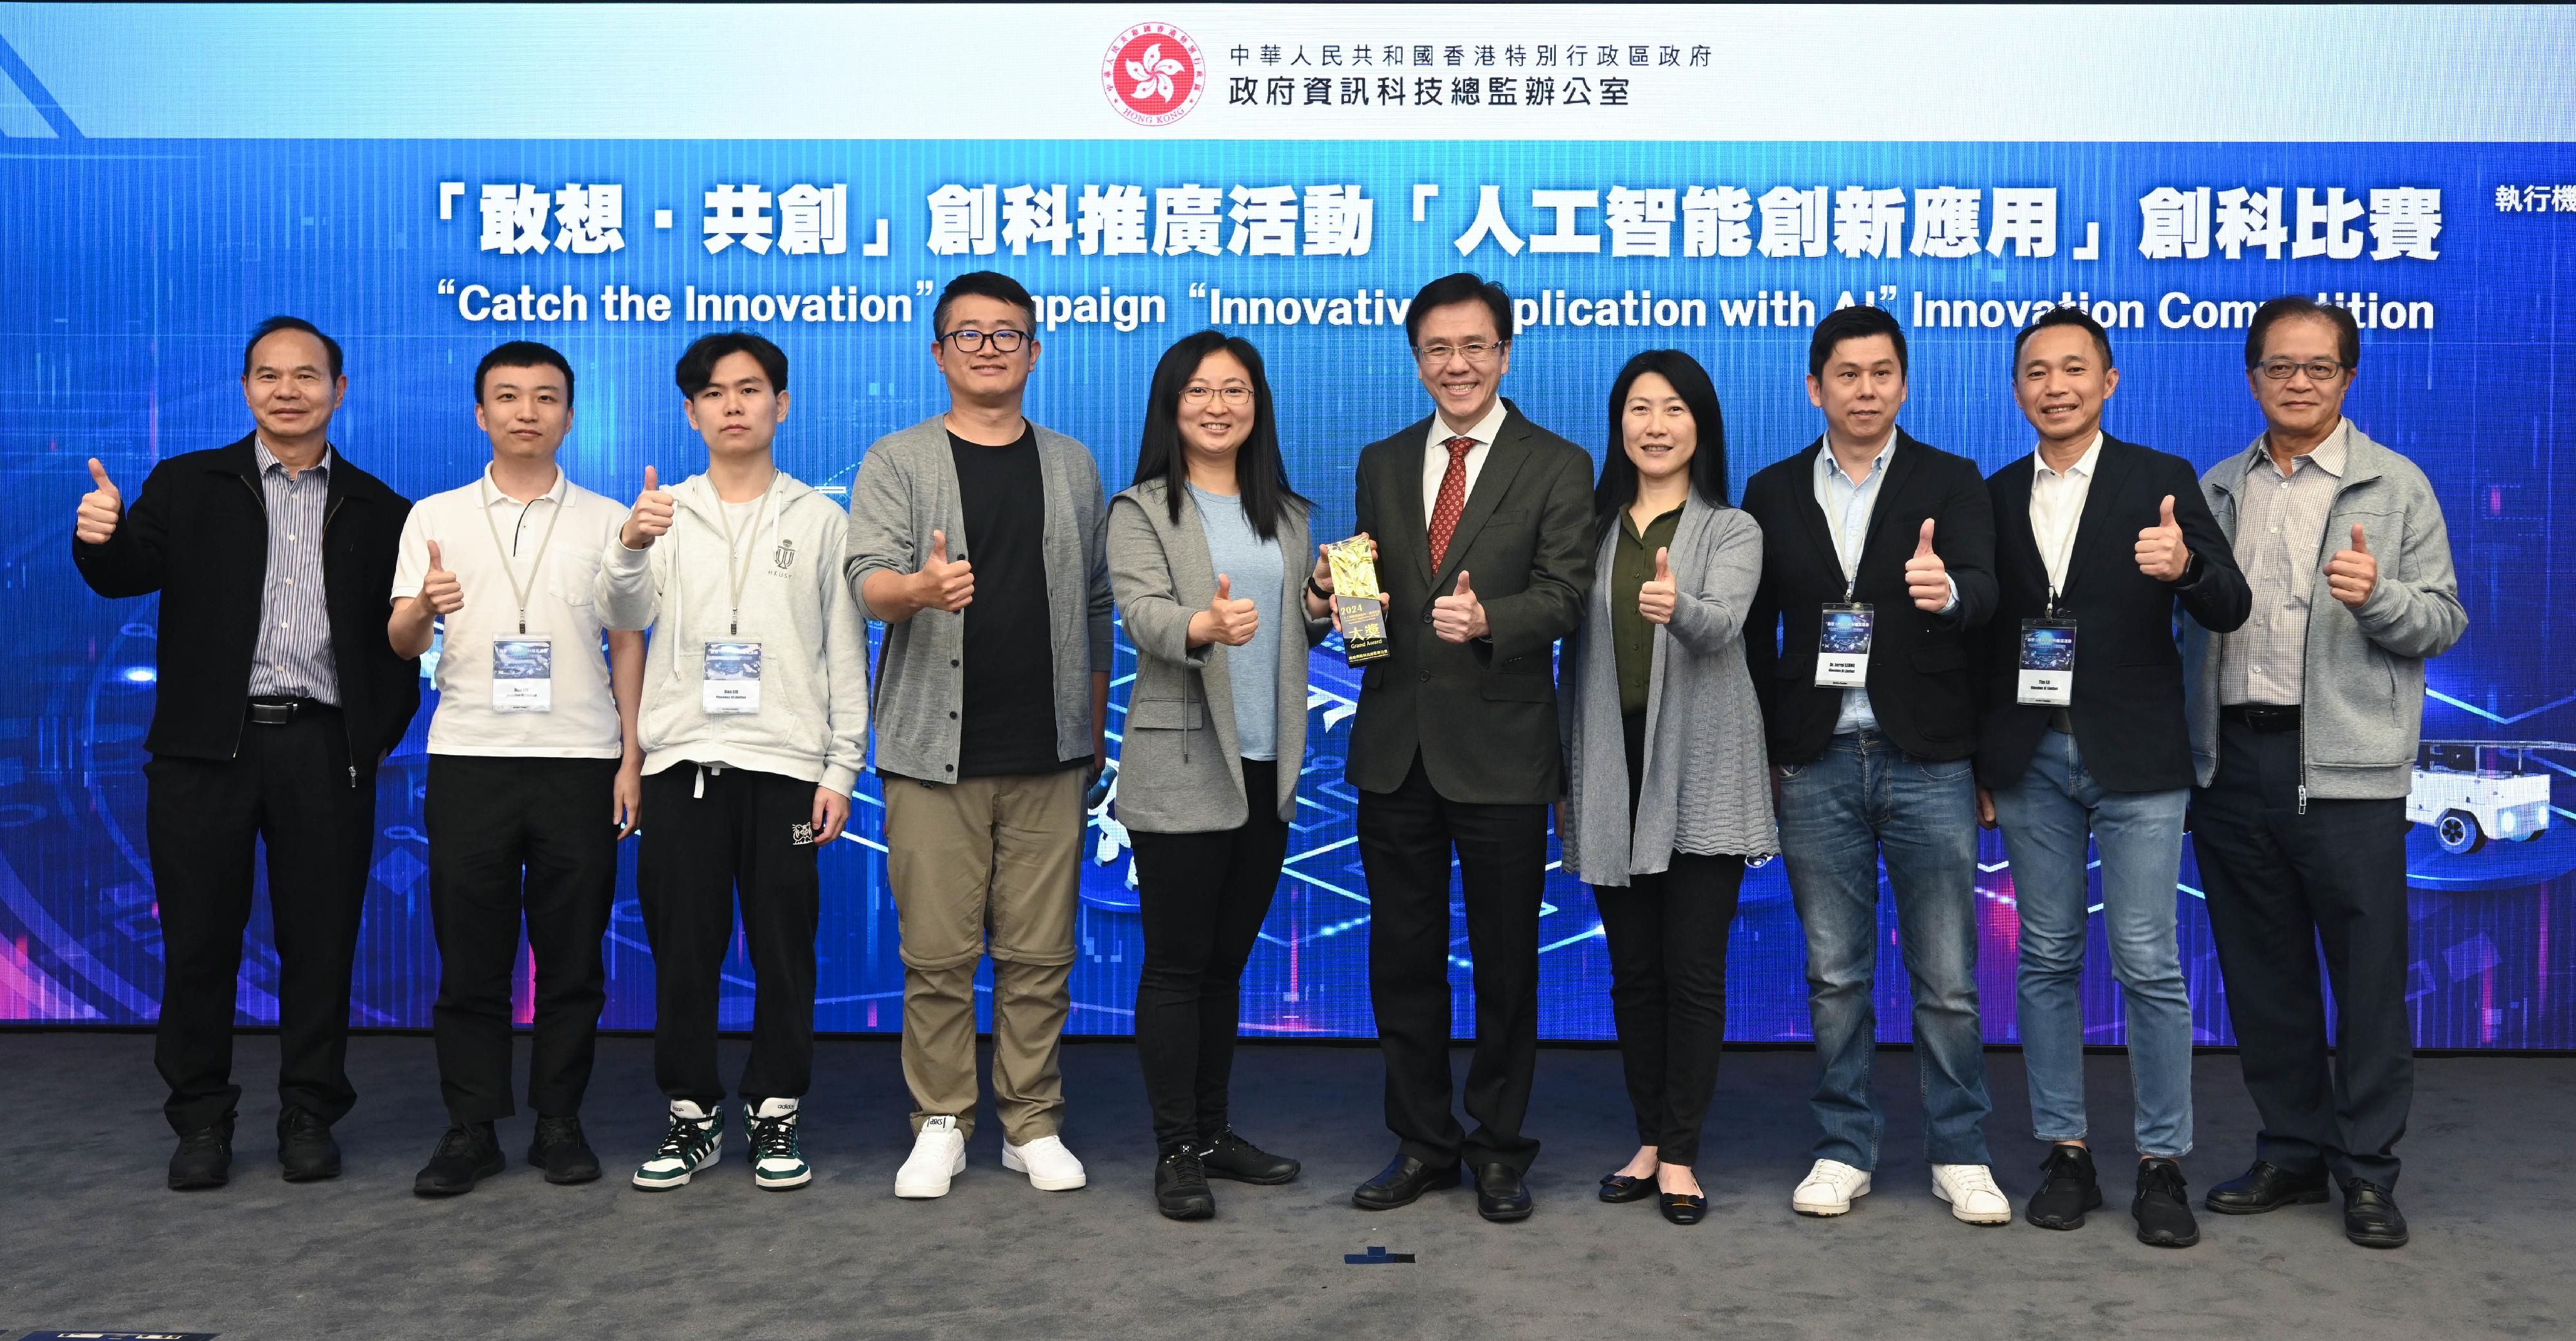 The Secretary for Innovation, Technology and Industry, Professor Sun Dong (fifth right), presents the grand award to team members of the project "Improving communications through generative sign language" at the Award Presentation Ceremony for the "Innovative Application with AI" Innovation Competition today (March 15) and is pictured with representatives of the relevant departments and the service provider. The departments to which the team members belong are the Office of the Government Chief Information Officer and the Census and Statistics Department.